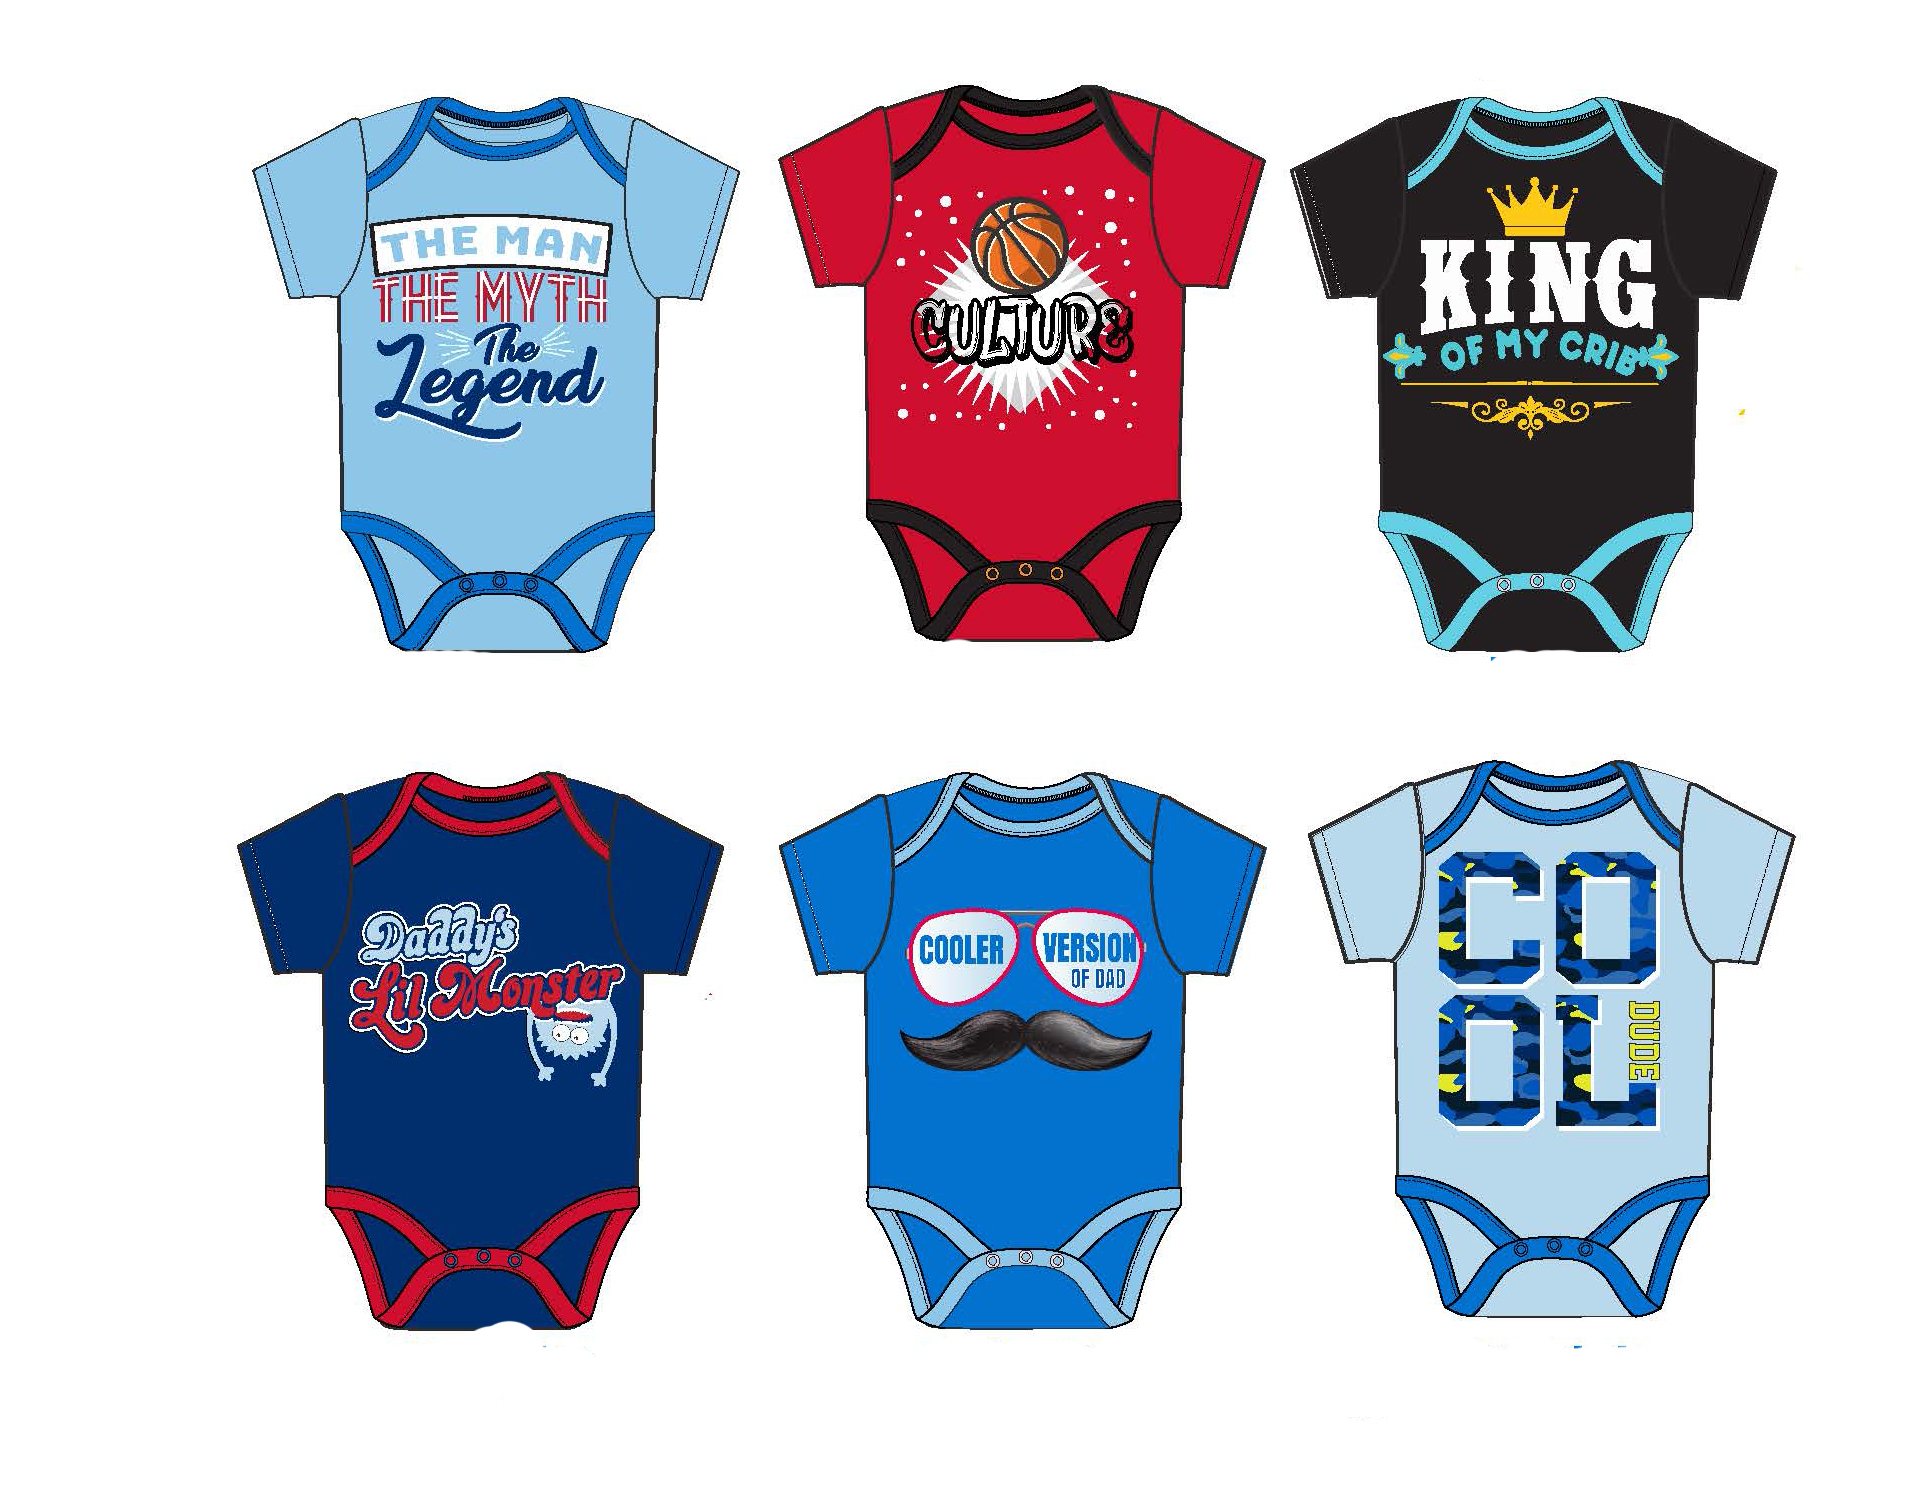 Baby Boy's Short-Sleeve Printed Graphic Onesies - Cool & King Attitude Print